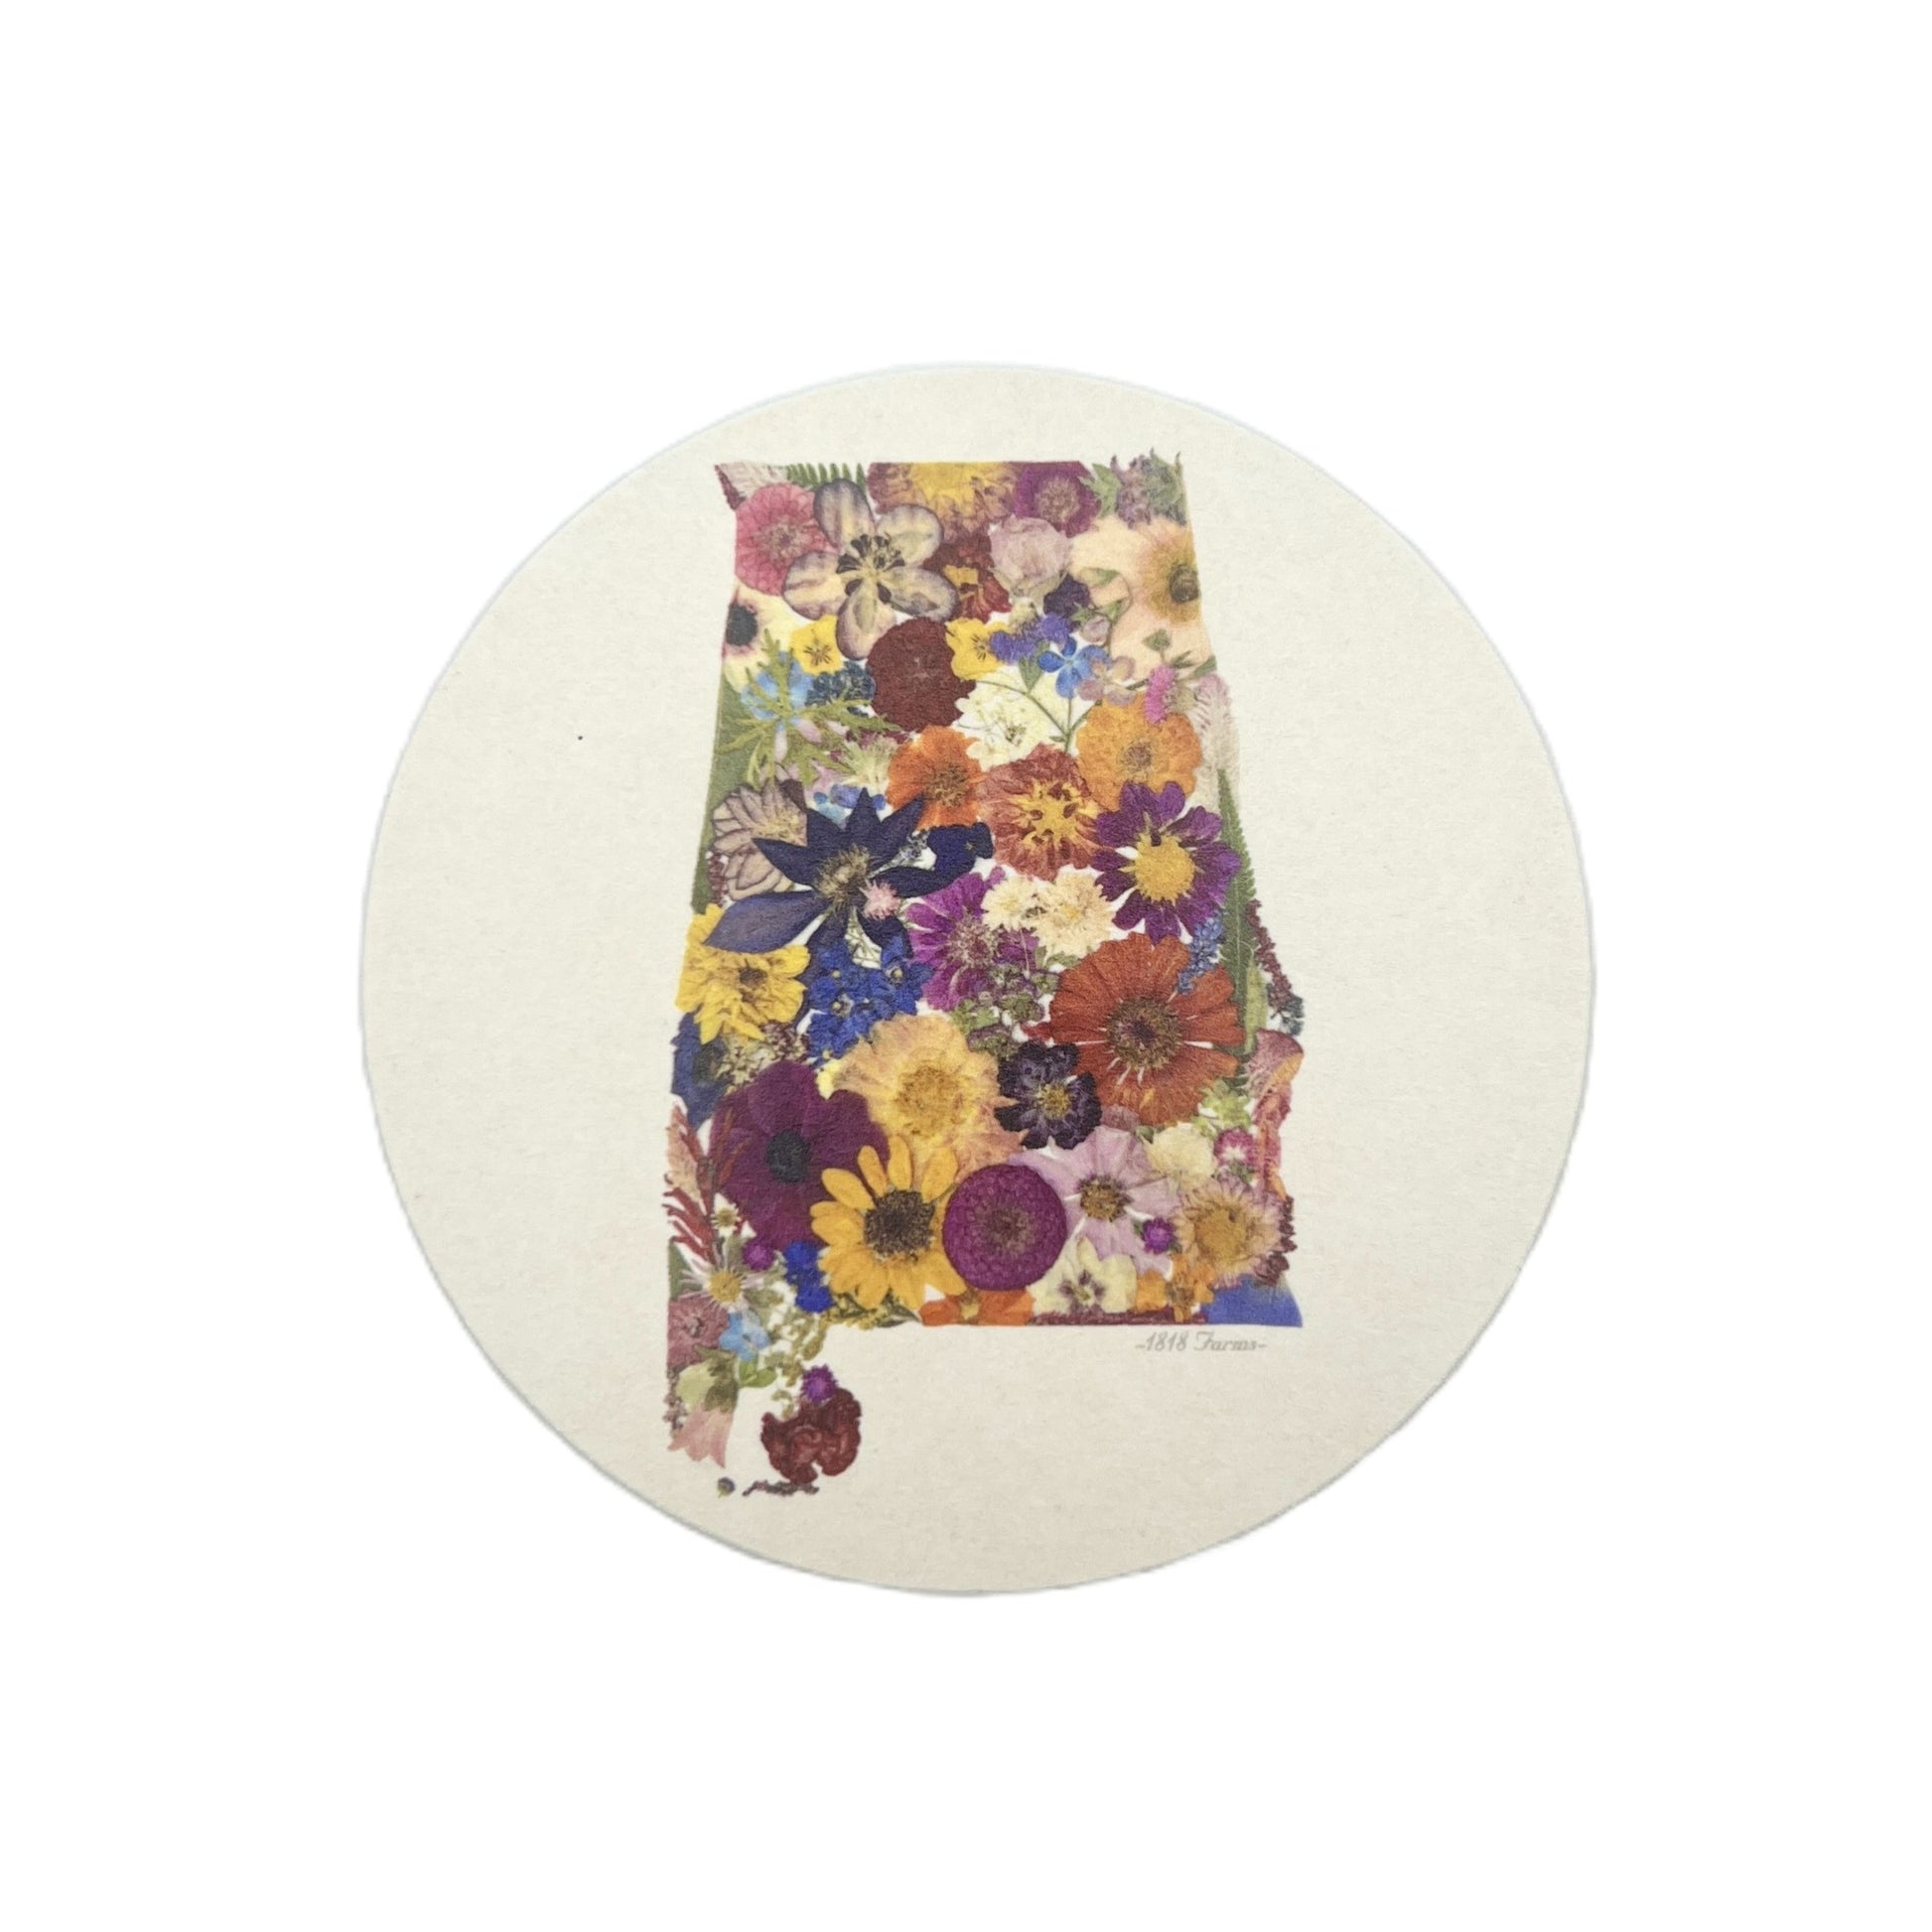 State Themed Drink Coasters (Set of 6) Featuring Dried, Pressed Flowers - "Where I Bloom" Collection Coaster 1818 Farms Alabama  